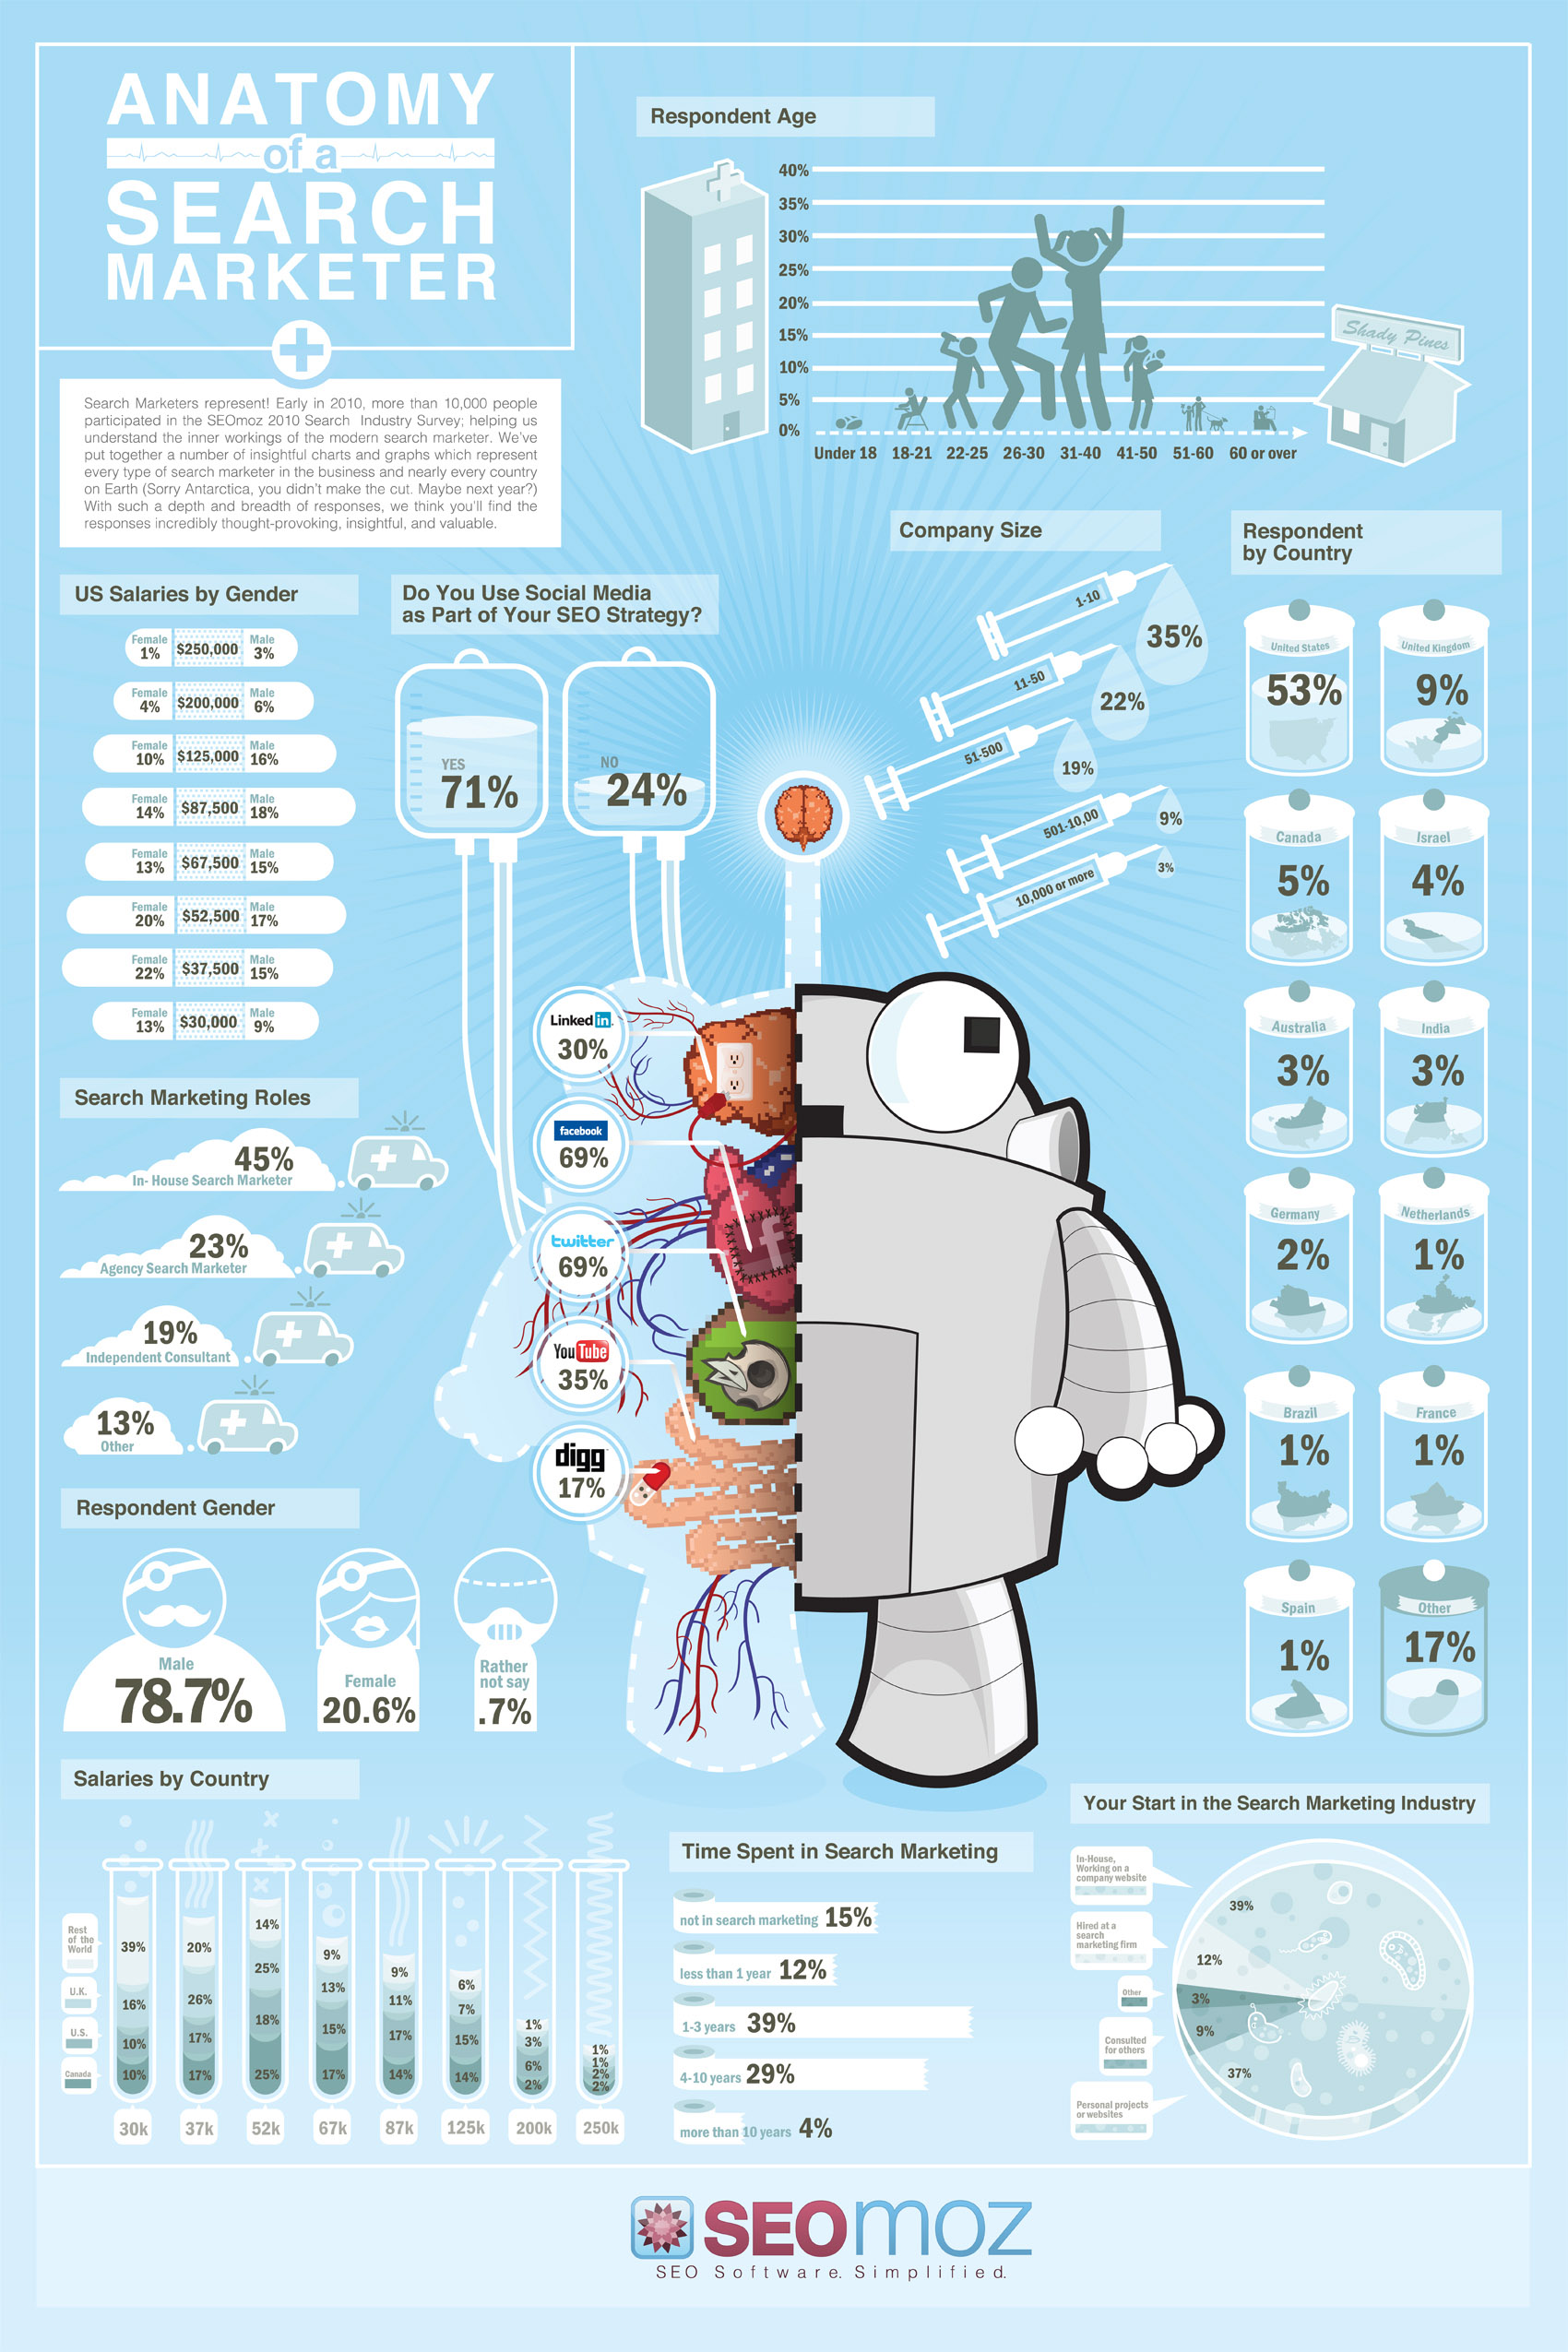 Moz infographic that doesn't suck at all